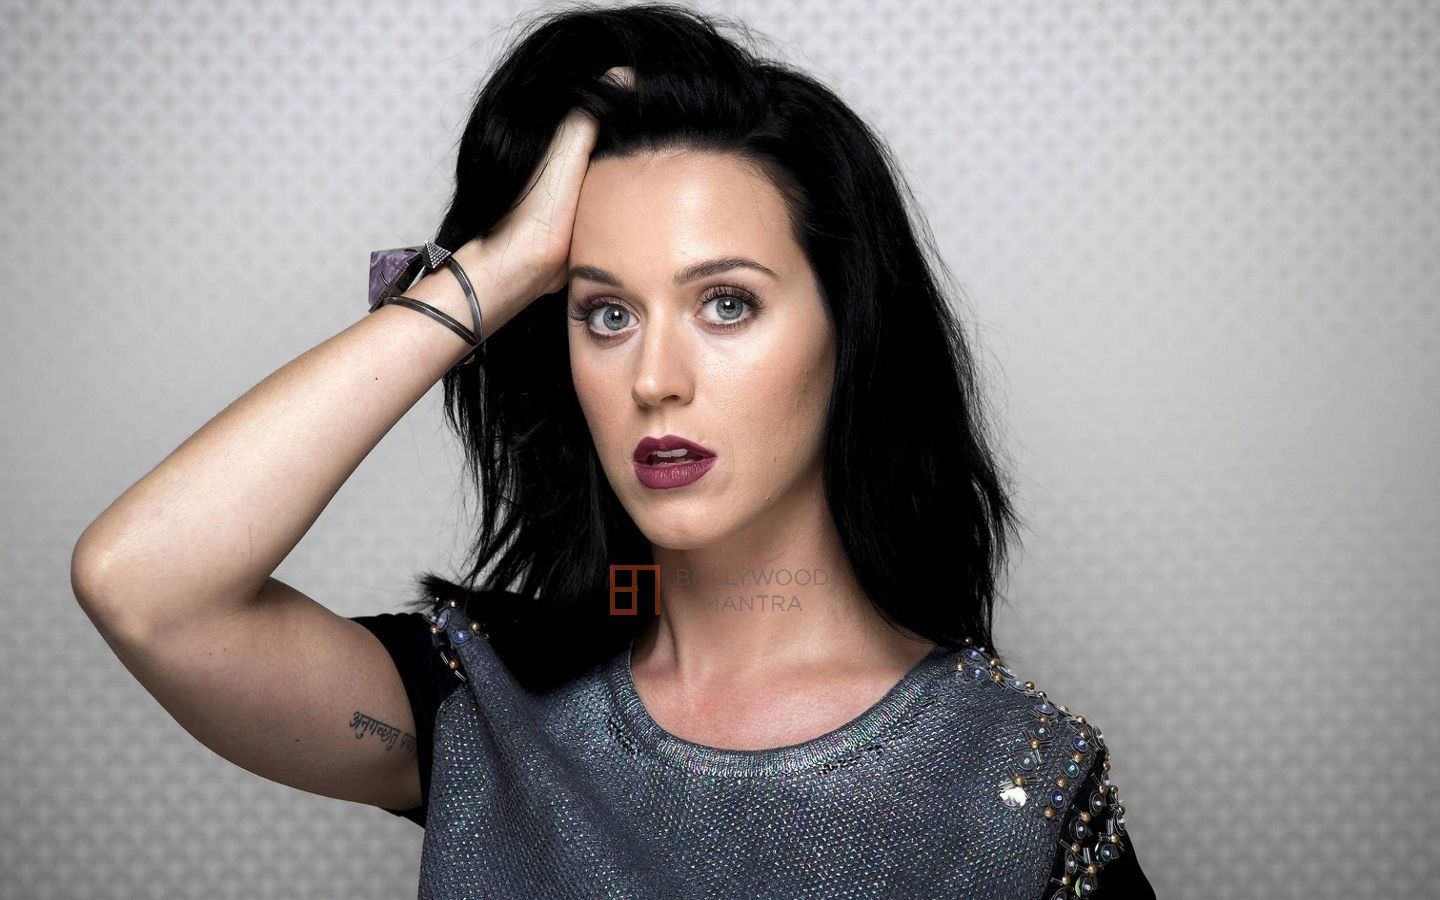 Katy Perry - Katy Perry Wallpaper 2017 , HD Wallpaper & Backgrounds